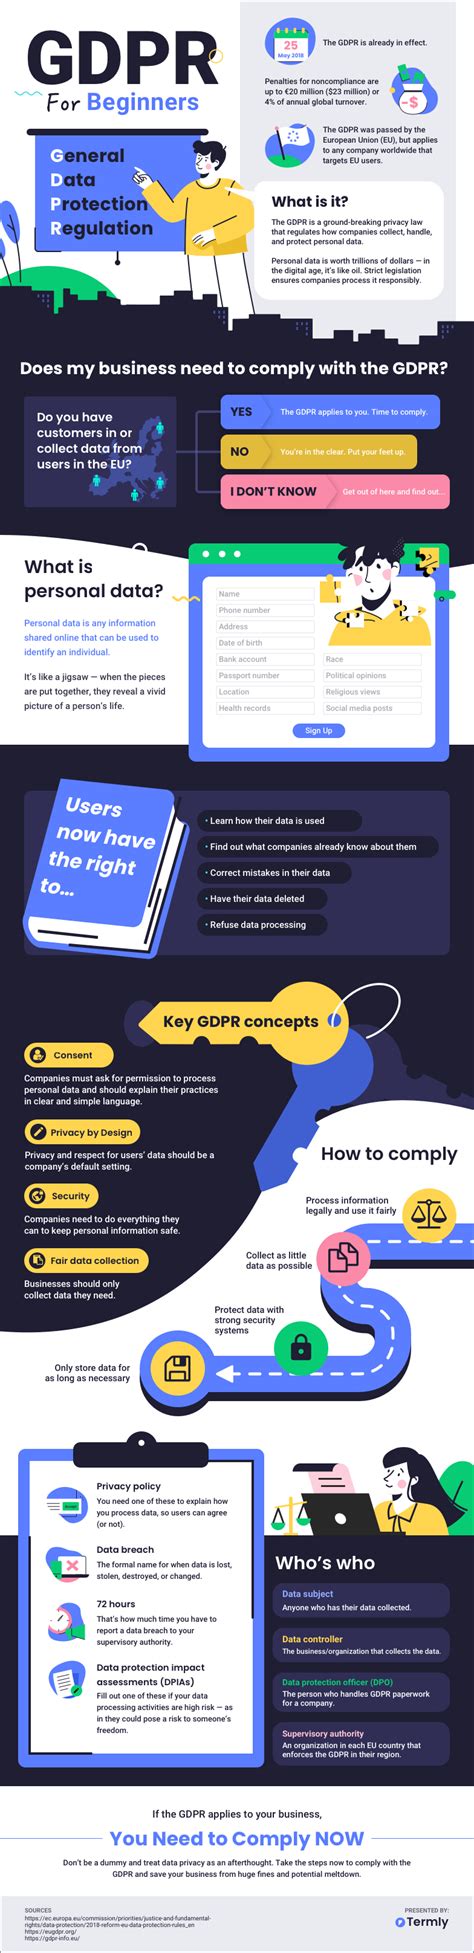 GDPR For Beginners Quick And Simple Guide To GDPR